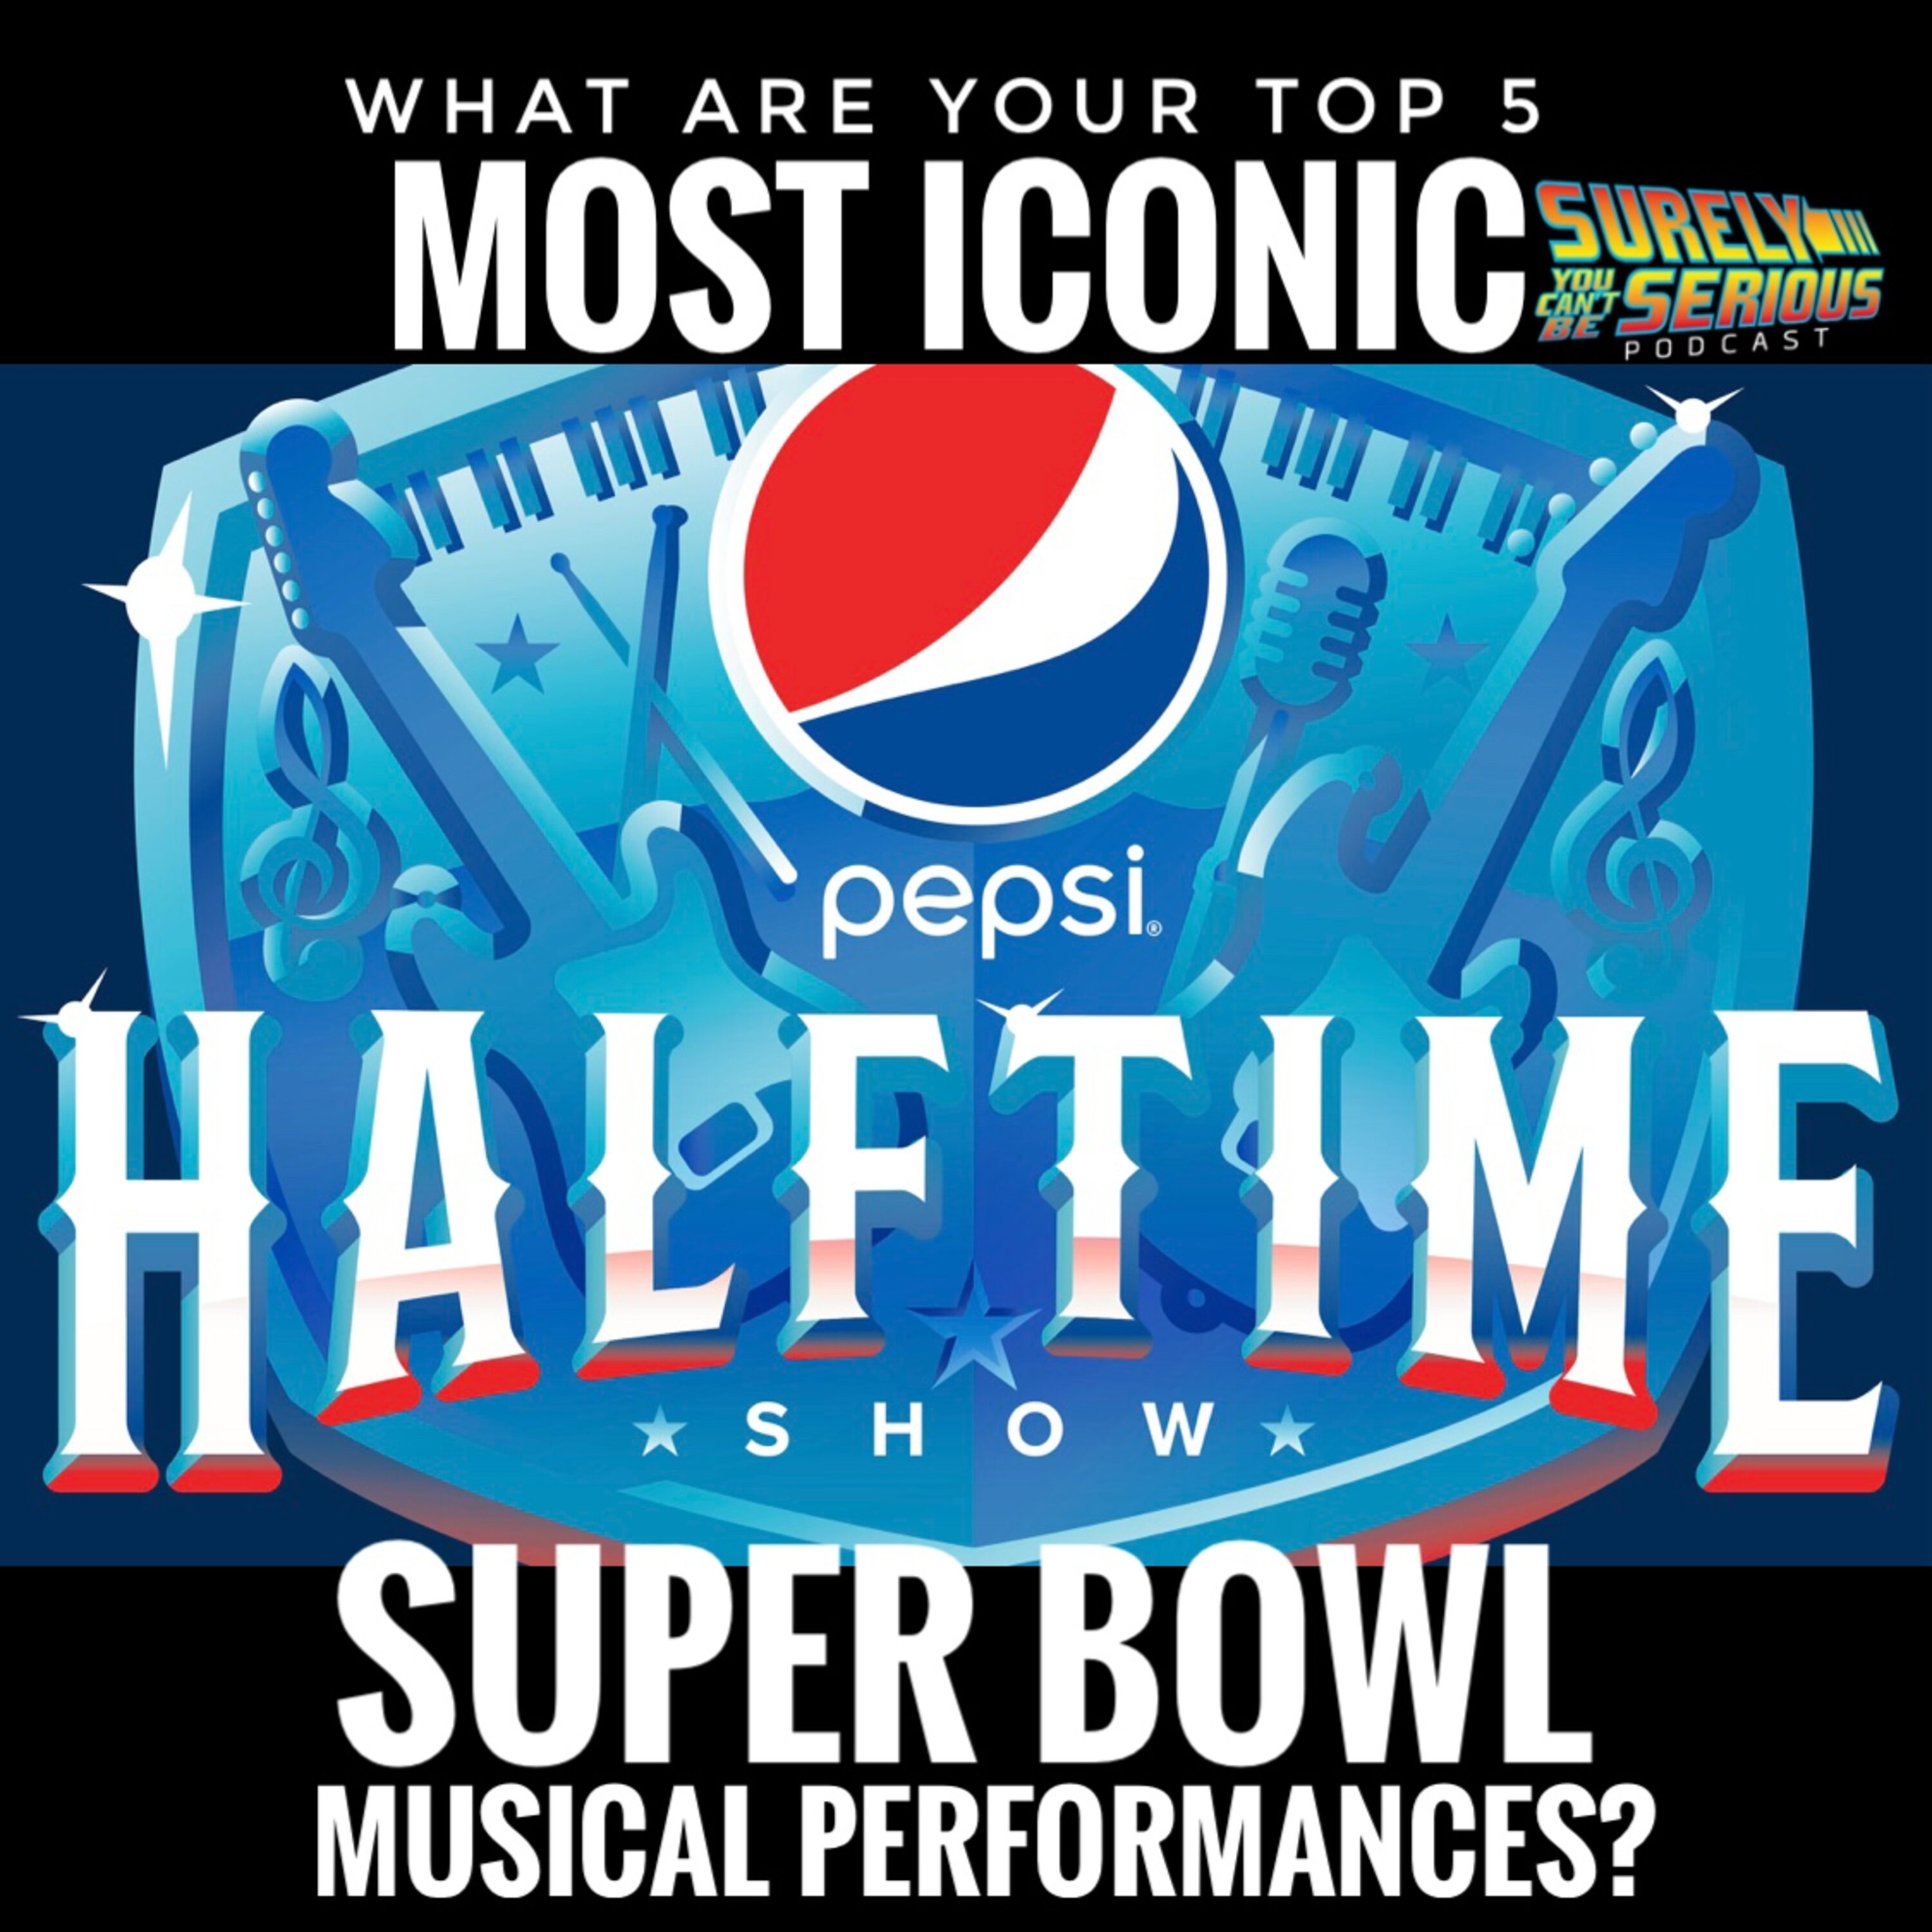 Top 5 Most Iconic Super Bowl Musical Performances! Image